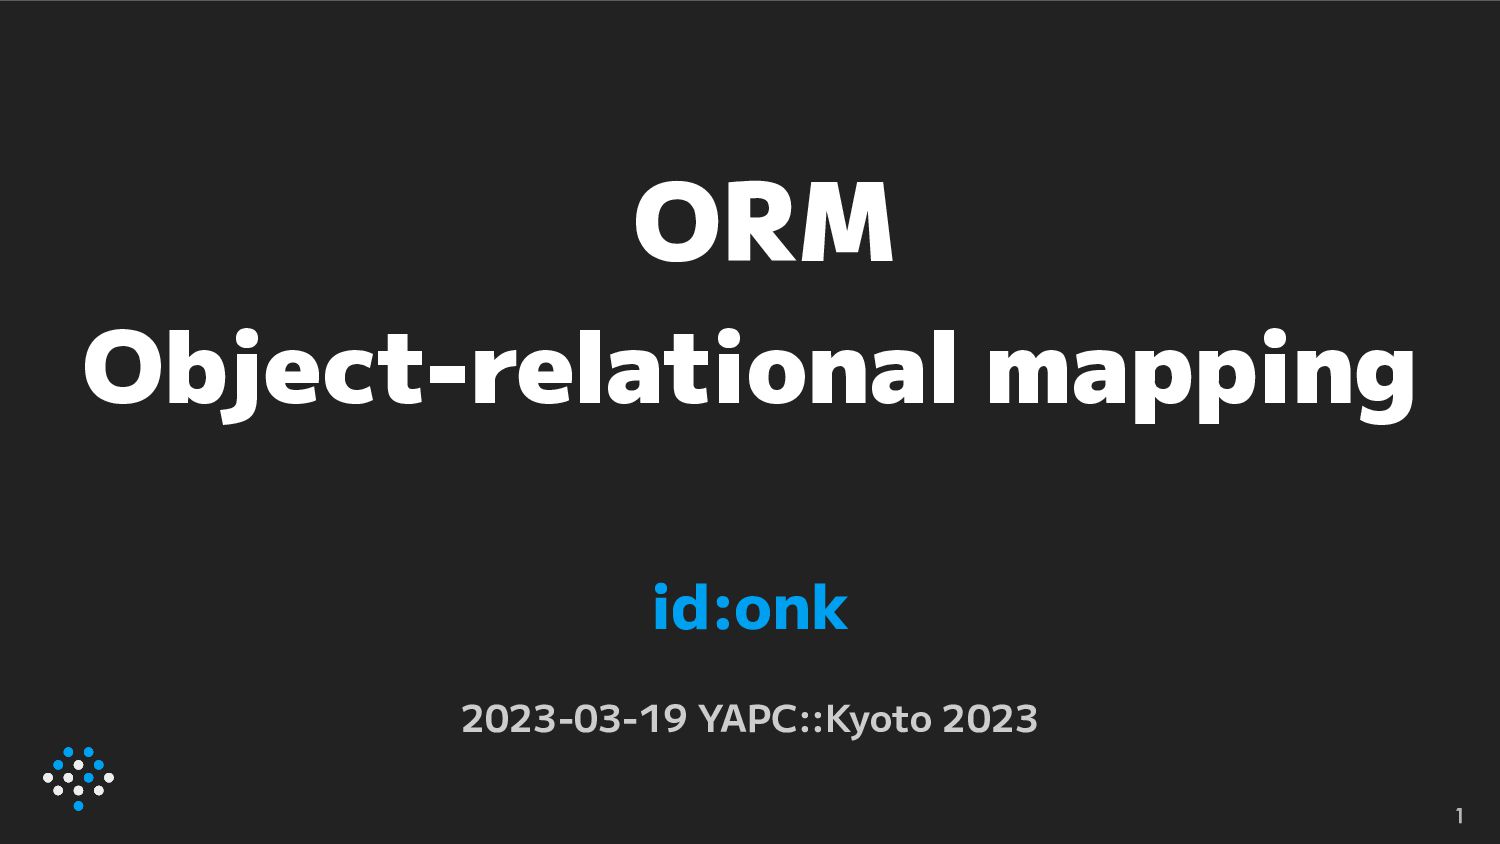 ORM - Object-relational mapping